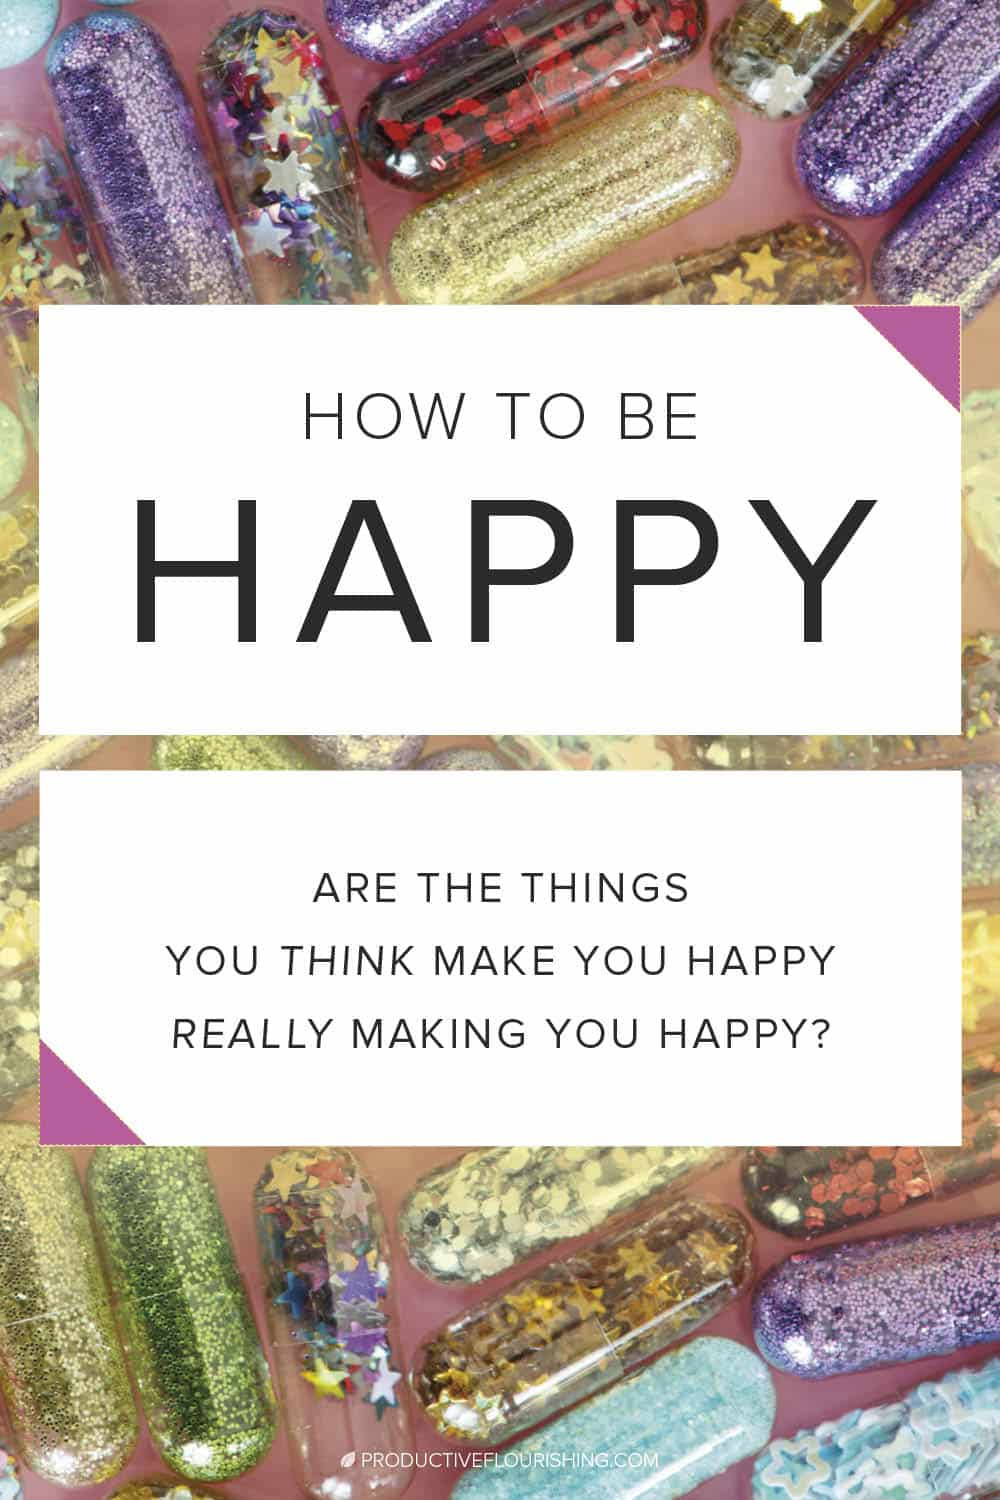 Read to discover if the things you think make you happy, are they really making you happy? A challenge most of us face is that we spend so much time thinking about what other people think we should do, want, and be that we fail to take seriously the idea that our happiness counts. #productiveflourishing #mindset #happiness